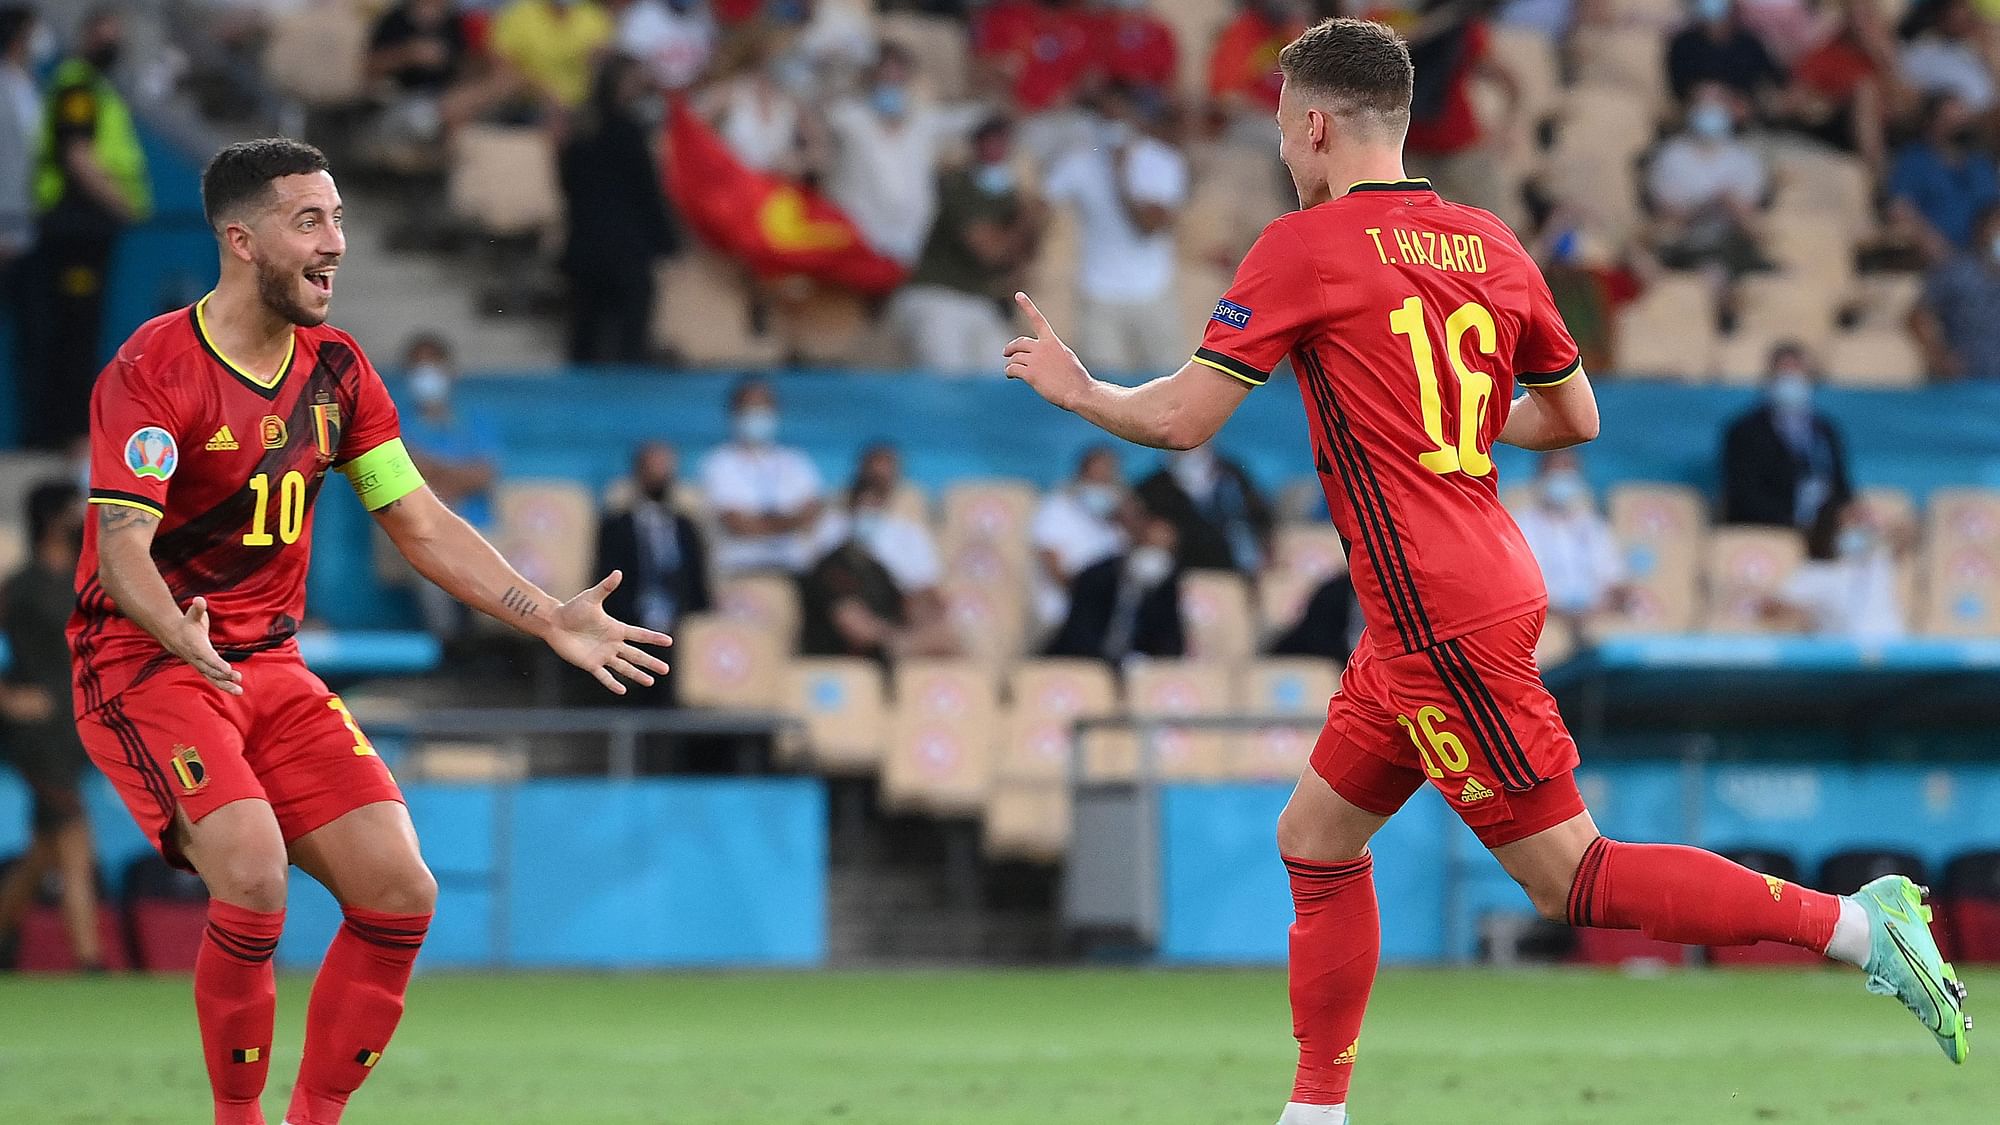 Thorgan Hazard celebrates his goal with brother Eden against Portugal in Euro 2020.